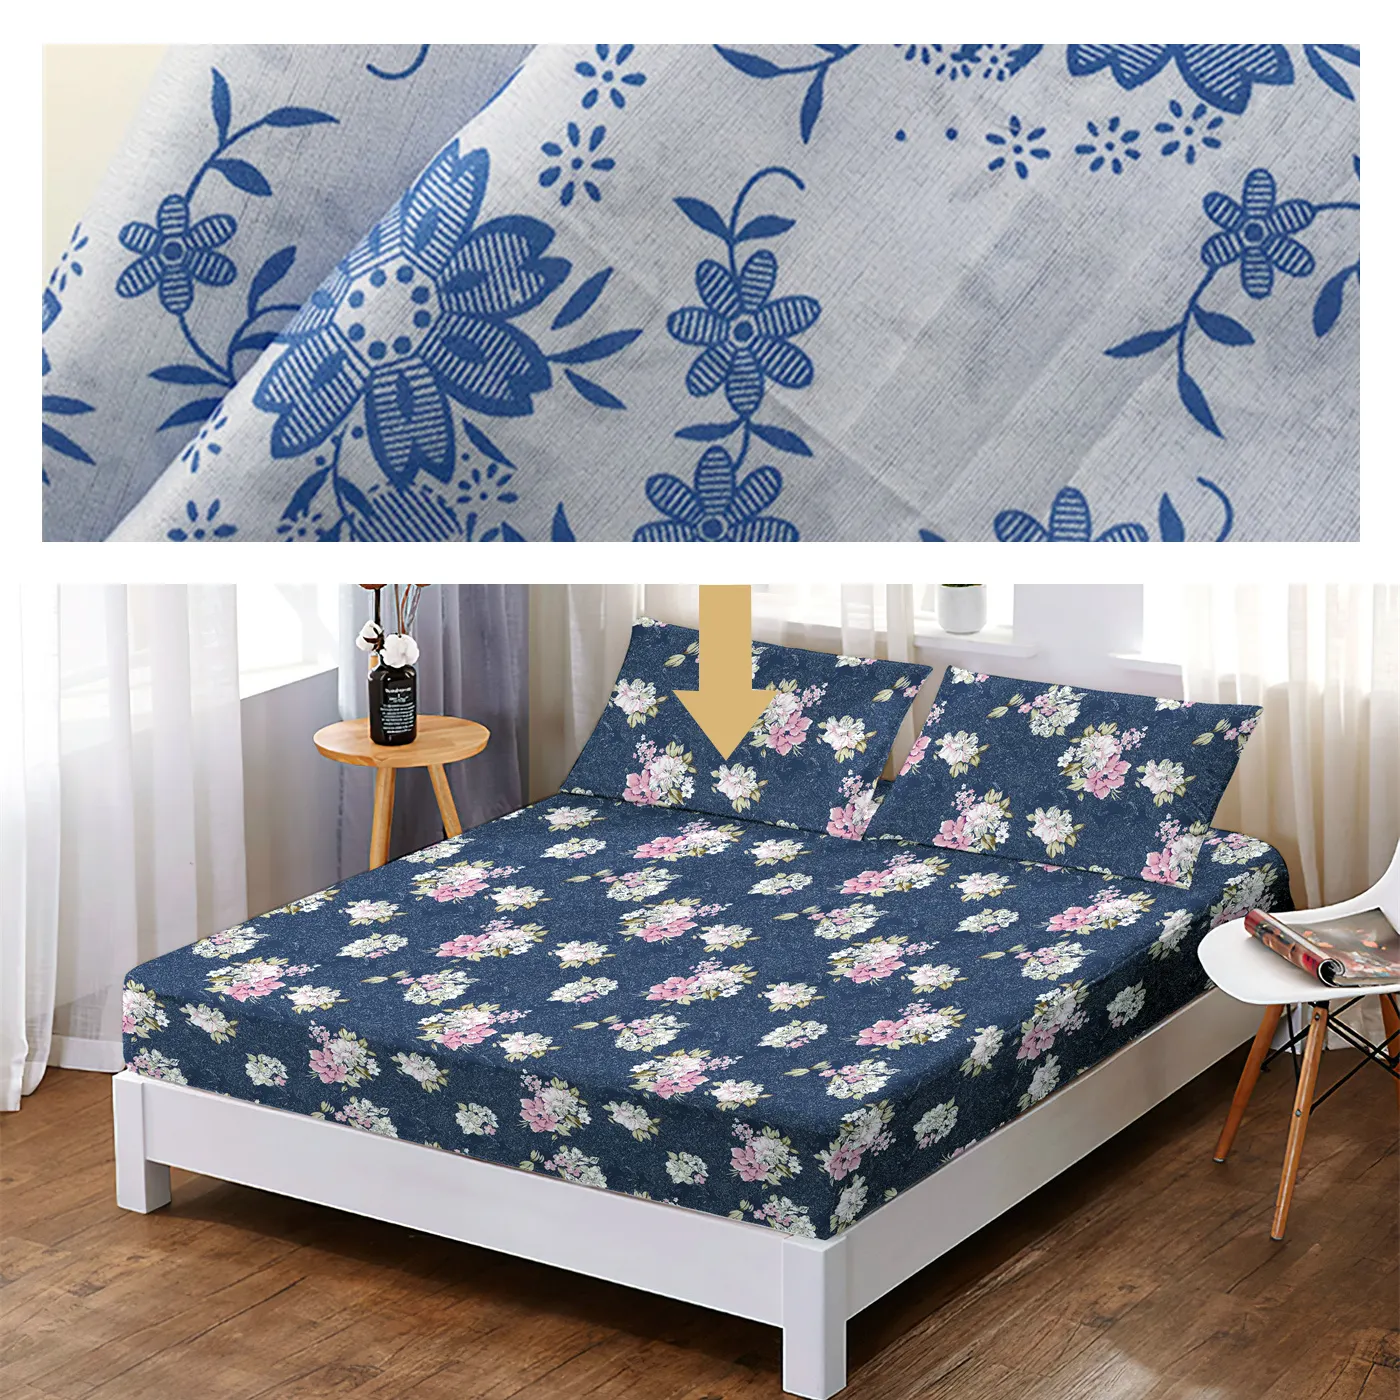 Everen Wholesale Custom Pigment/Disperse/Dyeing Polyester Printed Printing Brushed Colchones Colchon Mattress Fabric Tela